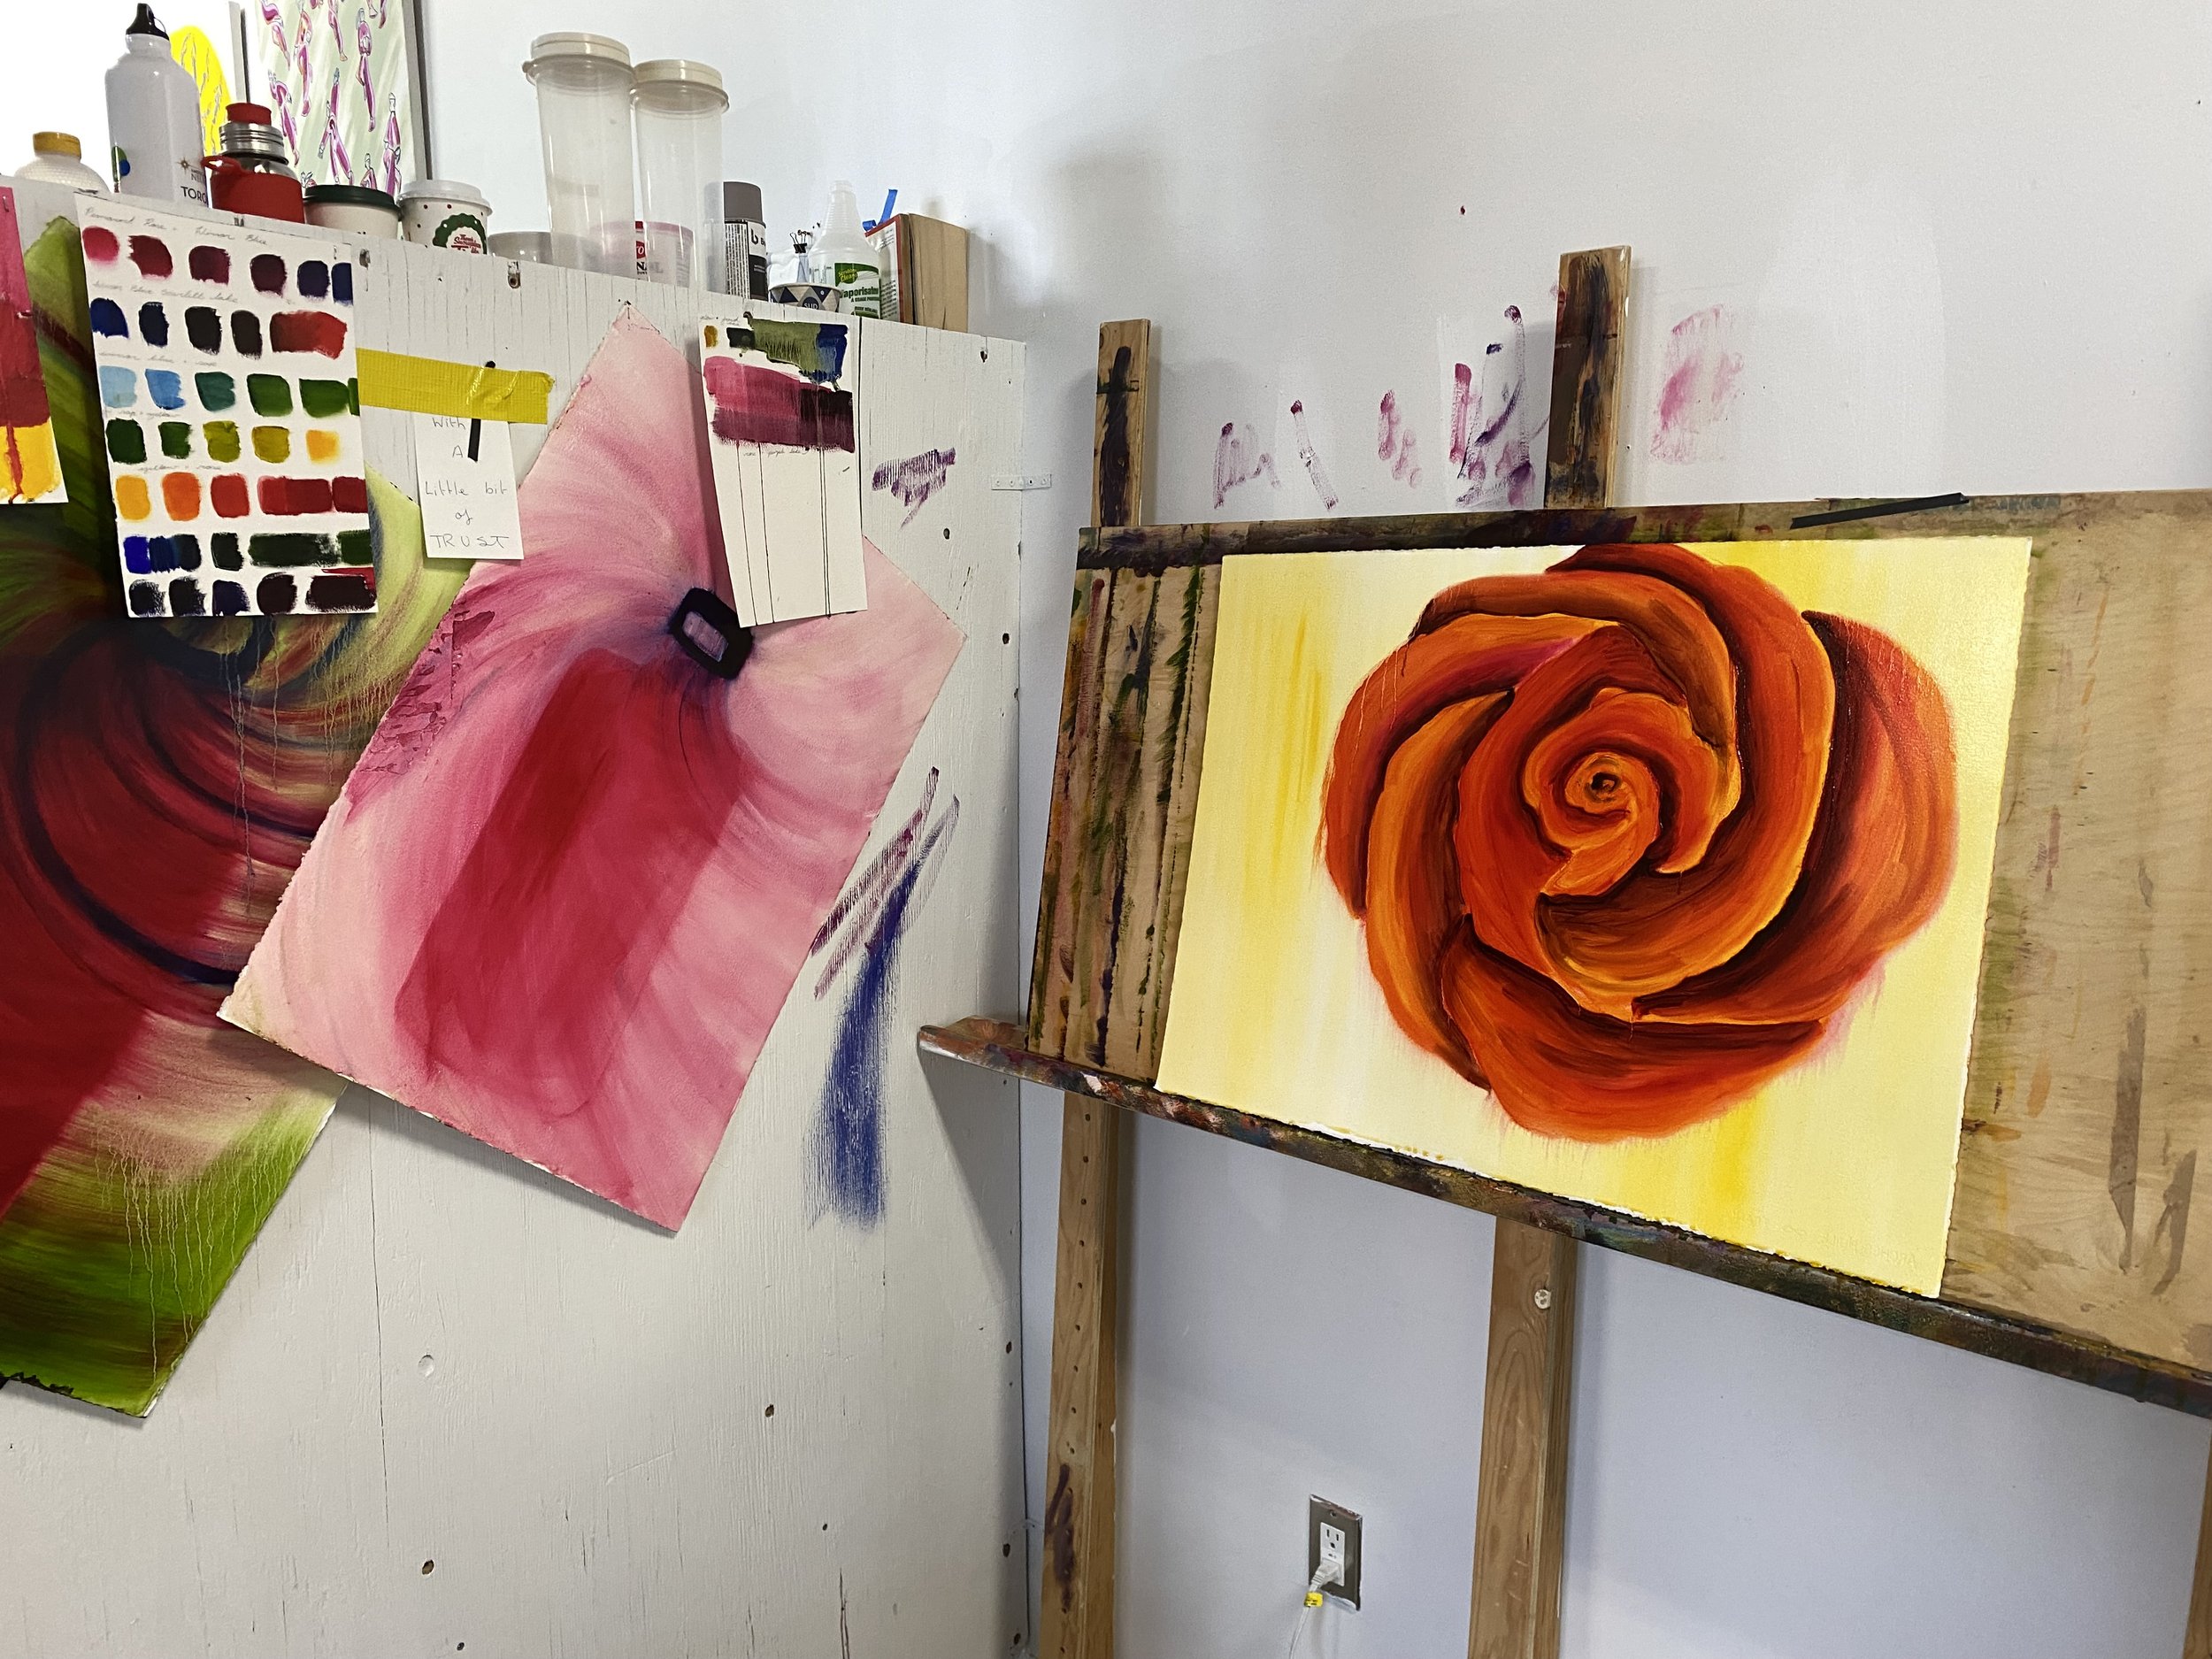   Kate Gorman’s studio, featuring a work in progress. To the left corner of the wall, paint swatches, colour tests and hand written notes are taped to the wall, amidst larger abstract paintings on paper of vivid pinks, reds, and greens. On the right 